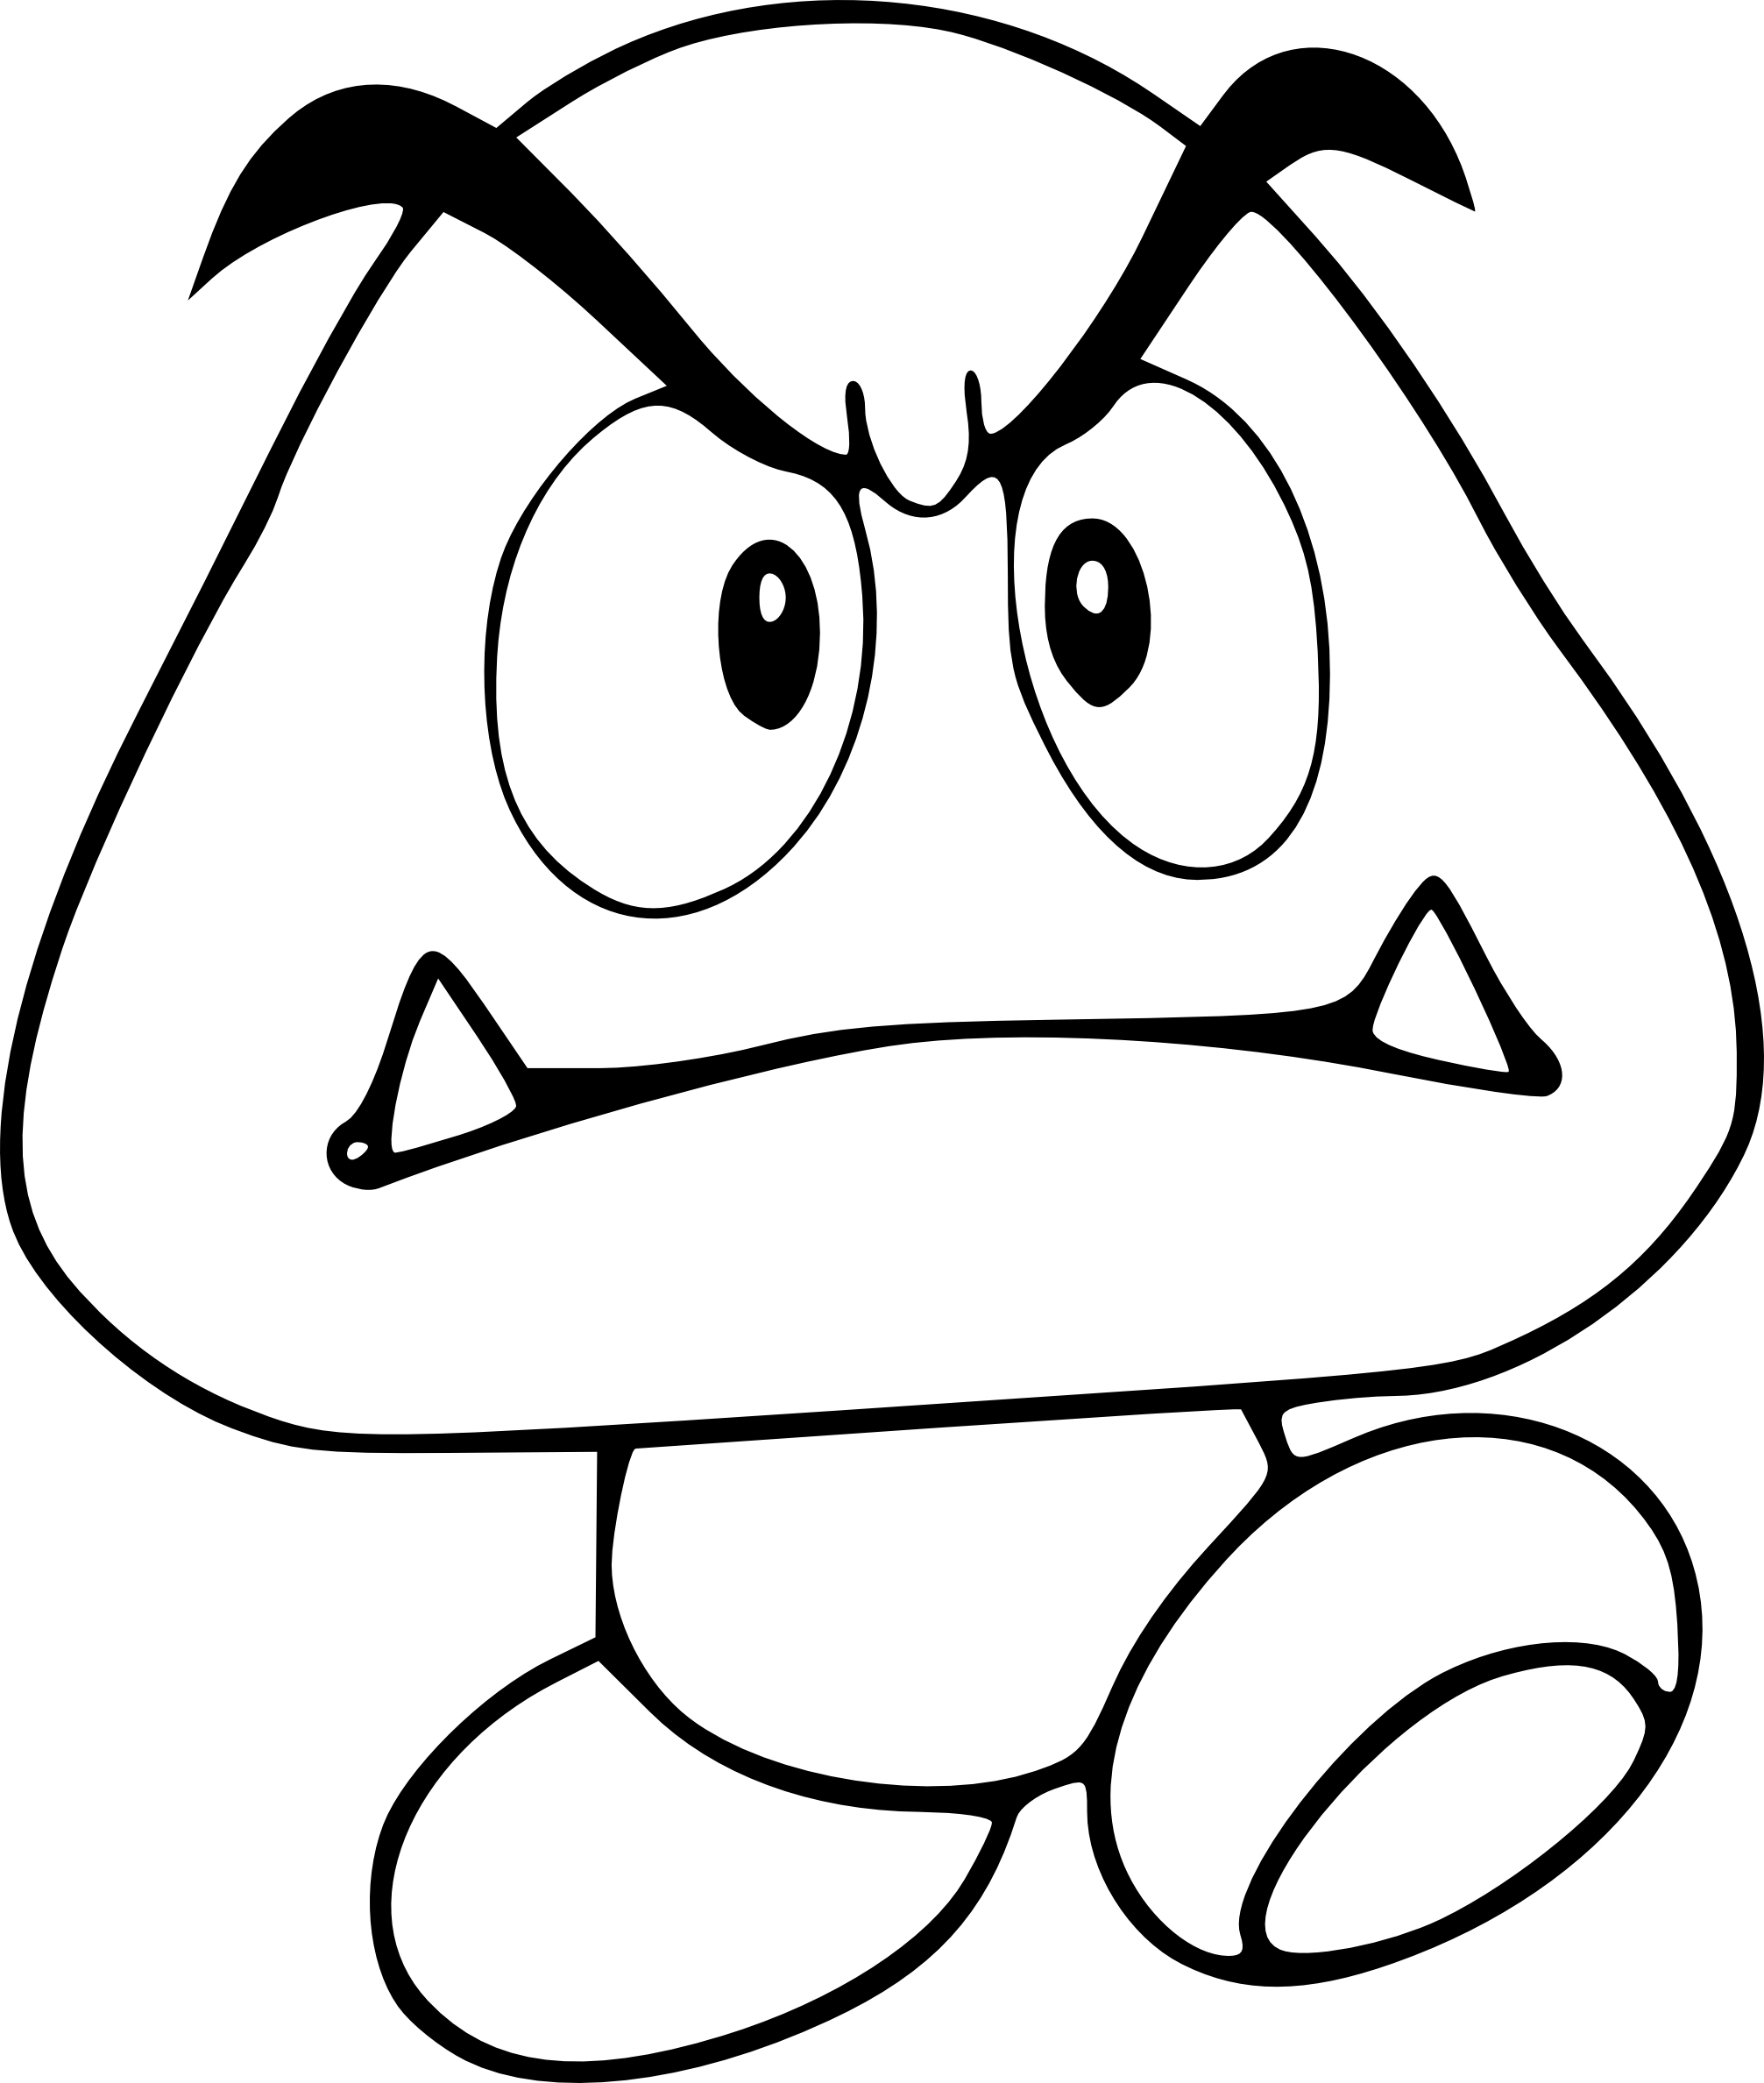 Goomba Mario character coloring page to print